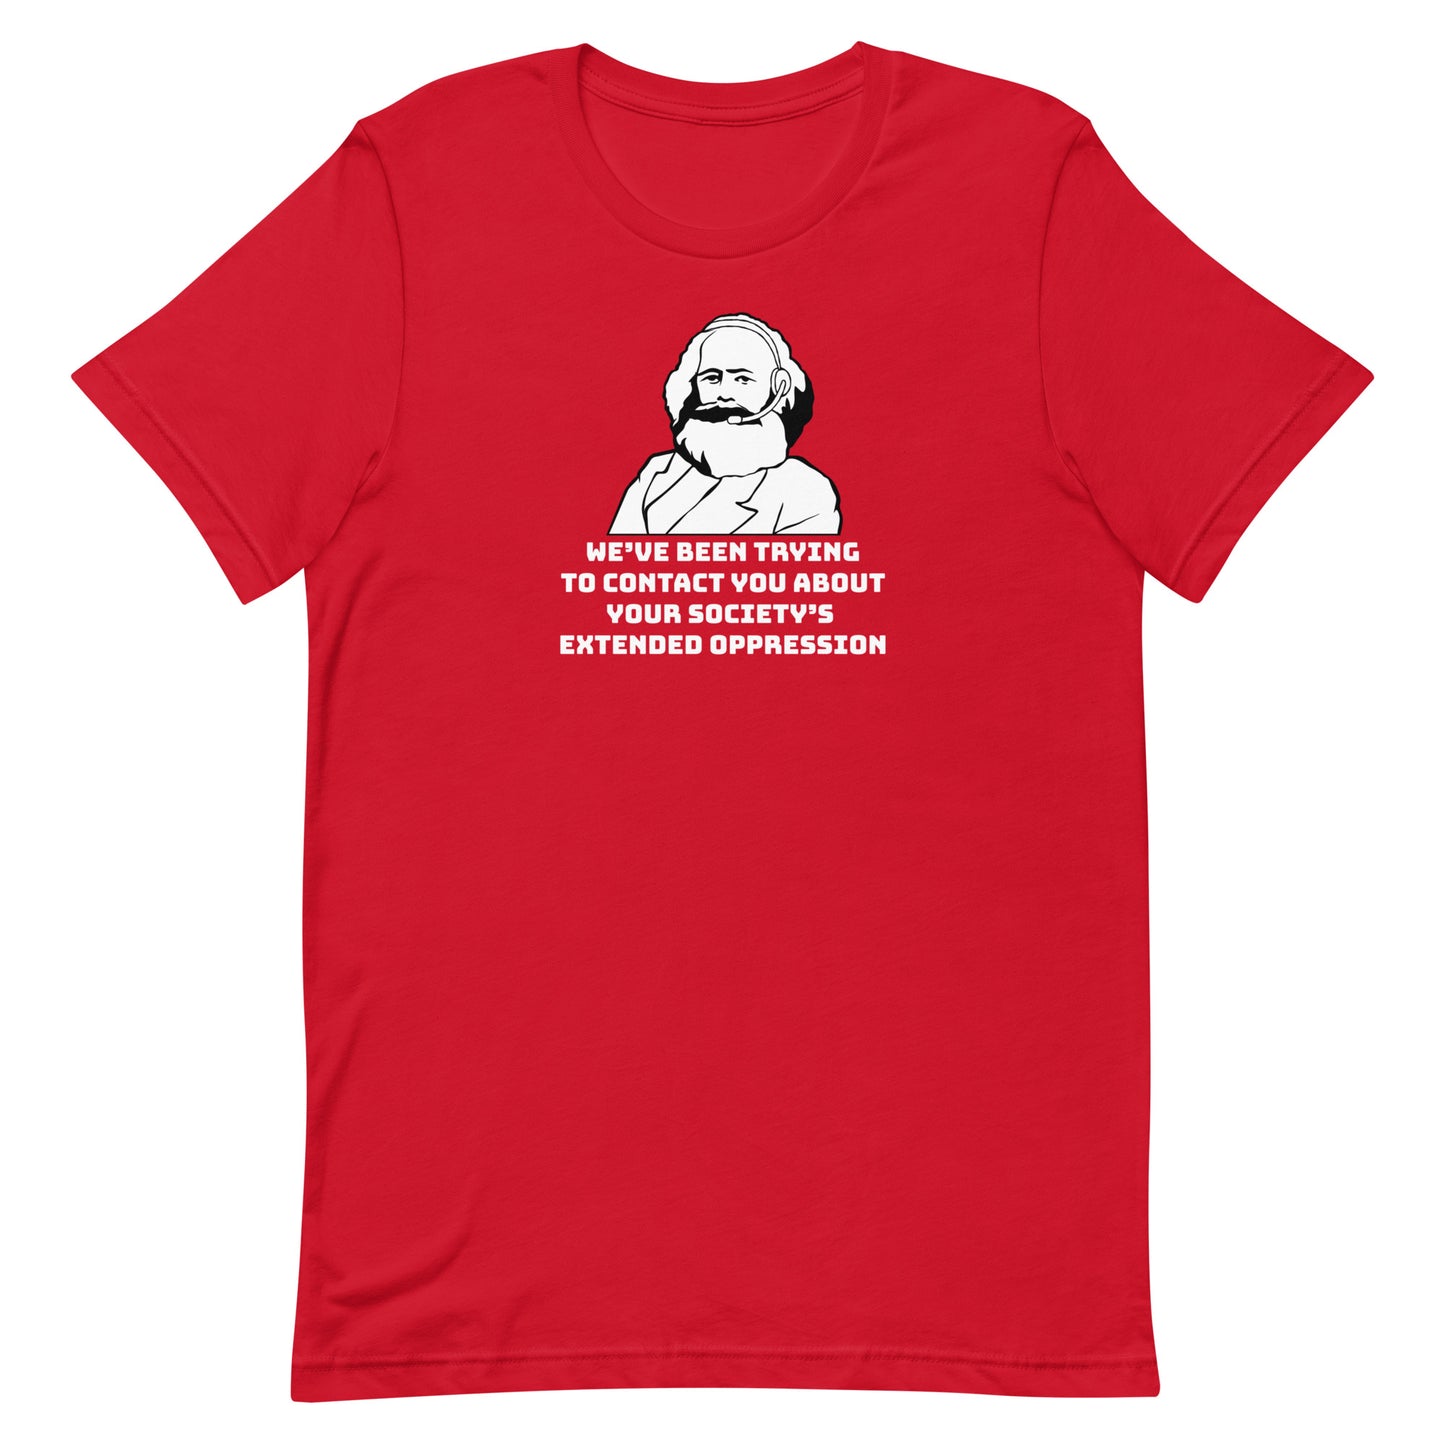 A red crewneck t-shirt featuring a black and white illustration of Karl Marx wearing a telemarketer headset. Text beneath Marx reads "We've been trying to contact you about your society's extended oppression." in a blocky font.